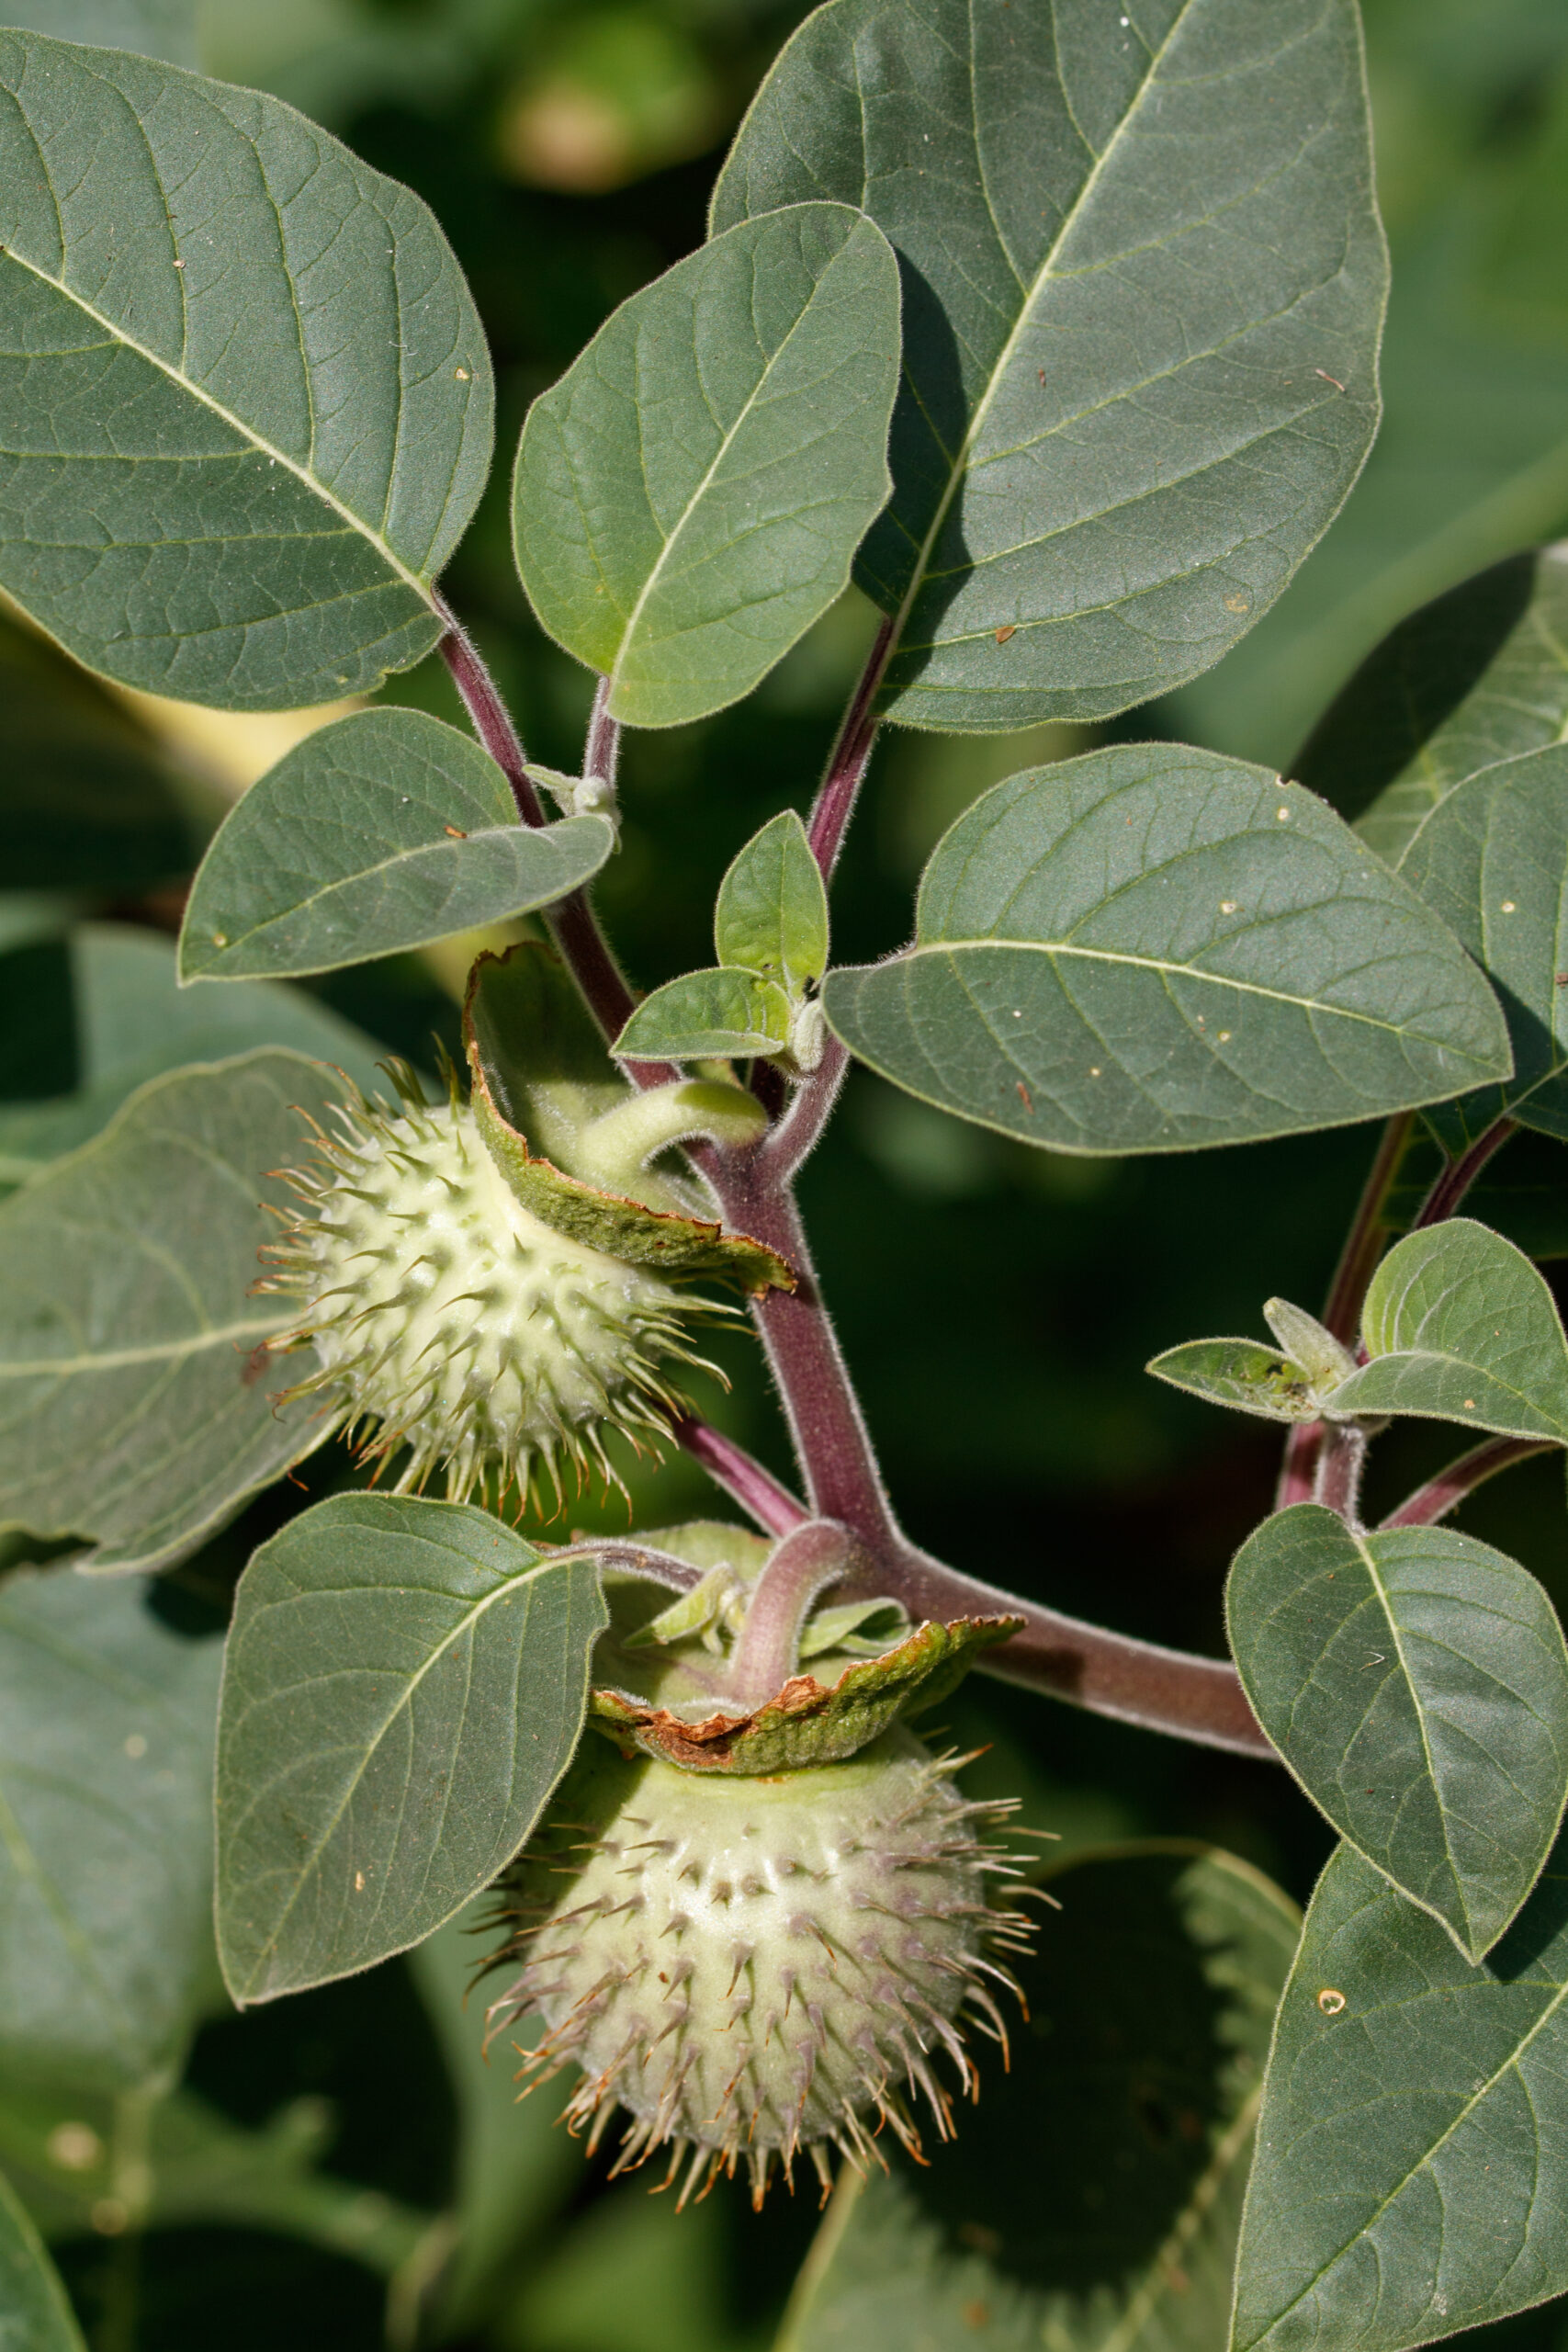 Spiny, spherical seed pods are forming among the green leaves of this datura plant.